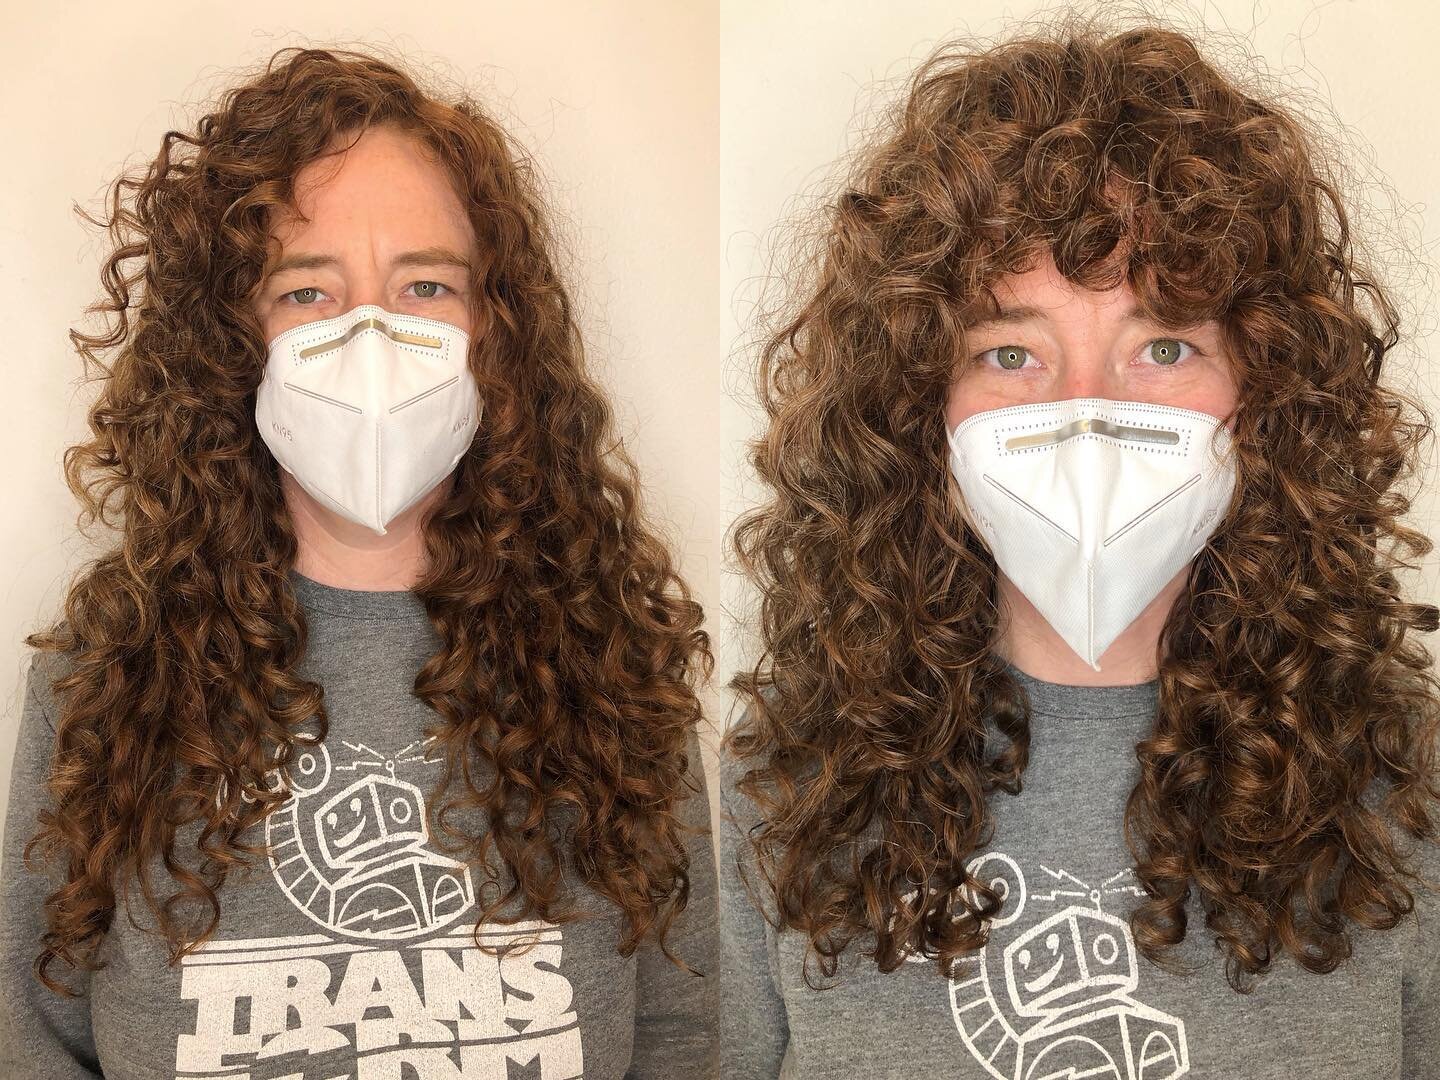 One of my favorite redheads ❤️✨Bringing back her curly bangs and a little more shape! Also, if you&rsquo;re into working out from home, you need @workoutwithericanix classes ASAP!!! All humans welcome, no experience necessary -check her out! She is a